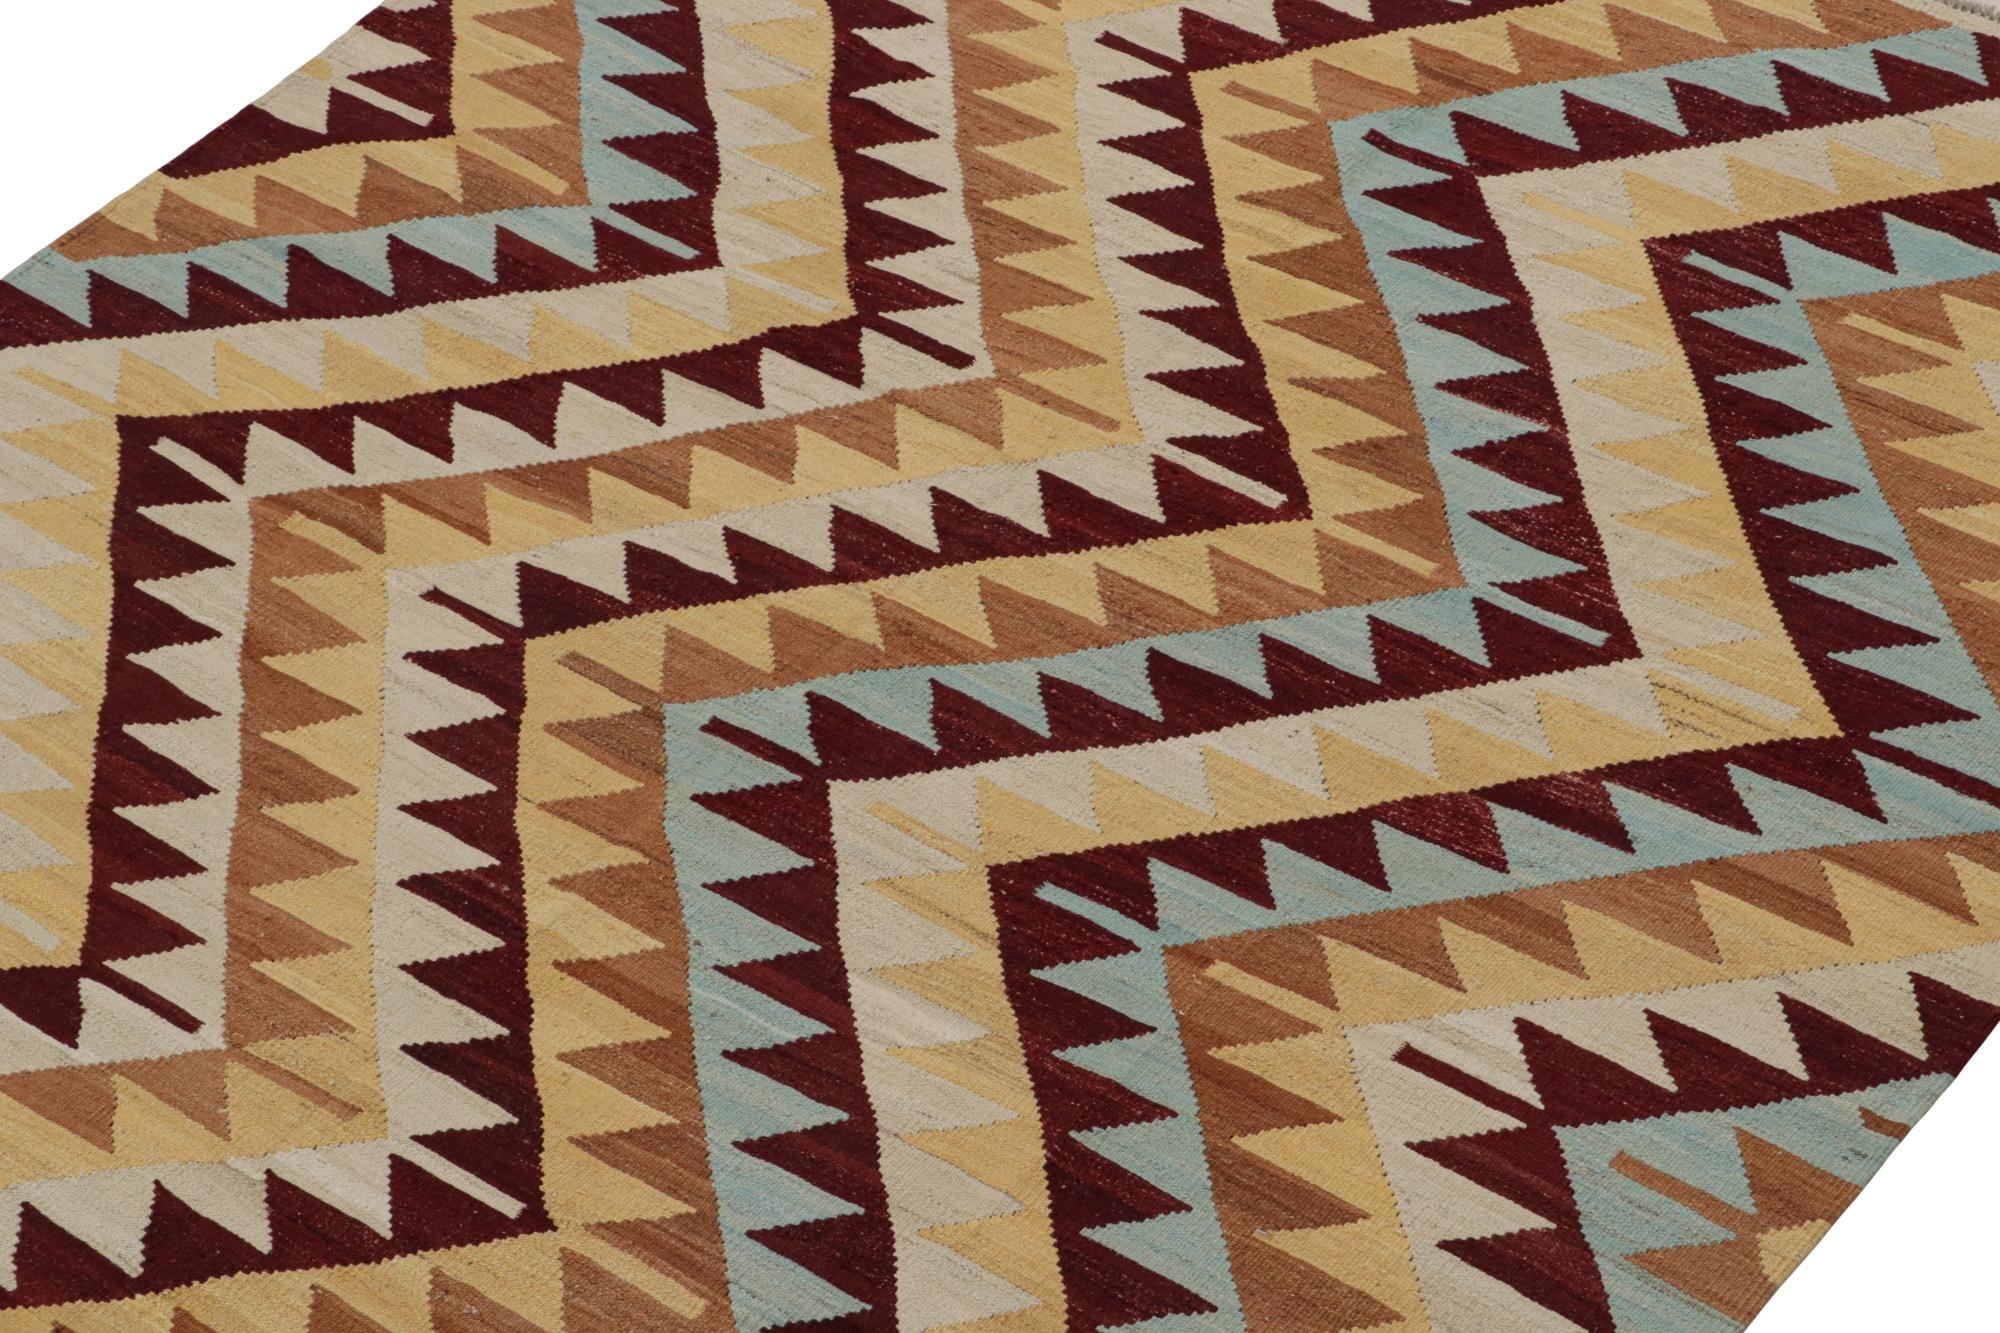 Handwoven in wool, this contemporary 7x8 Kilim by Rug & Kilim is inspired by antique tribal Kilims and flatweaves. 

On the Design:

This area rug enjoys a play of chevrons and geometric patterns in burgundy, beige-brown, sky blue and gold hues.